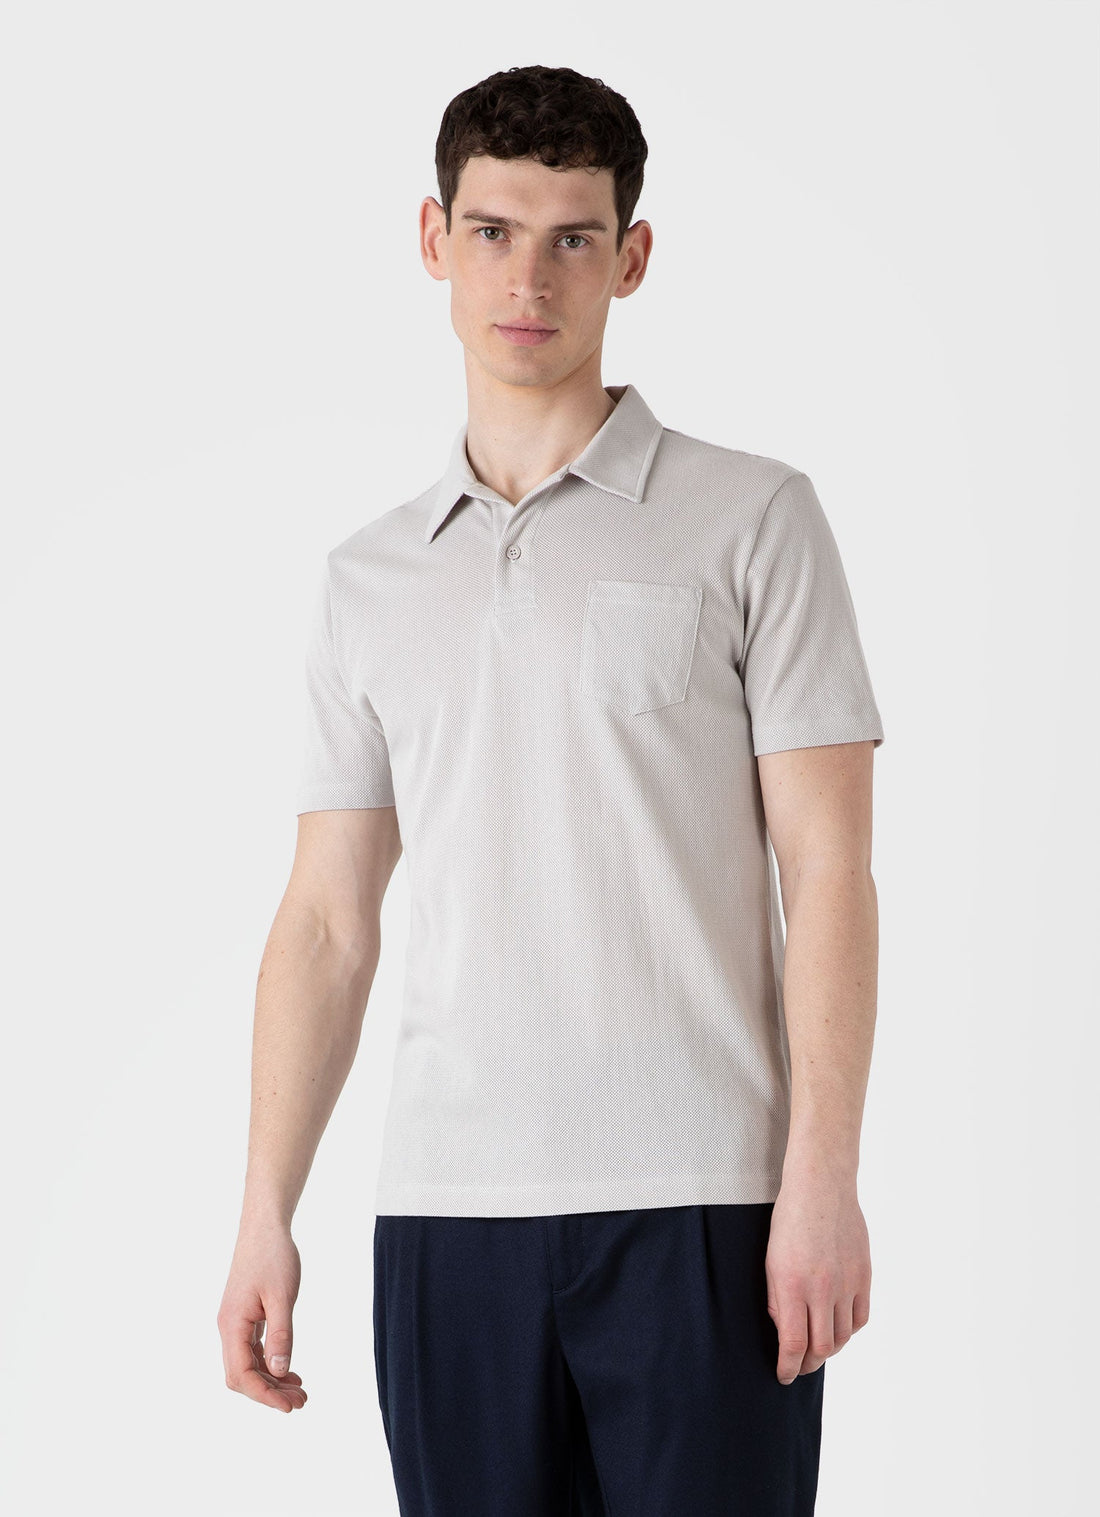 Men's Riviera Polo Shirt in Putty